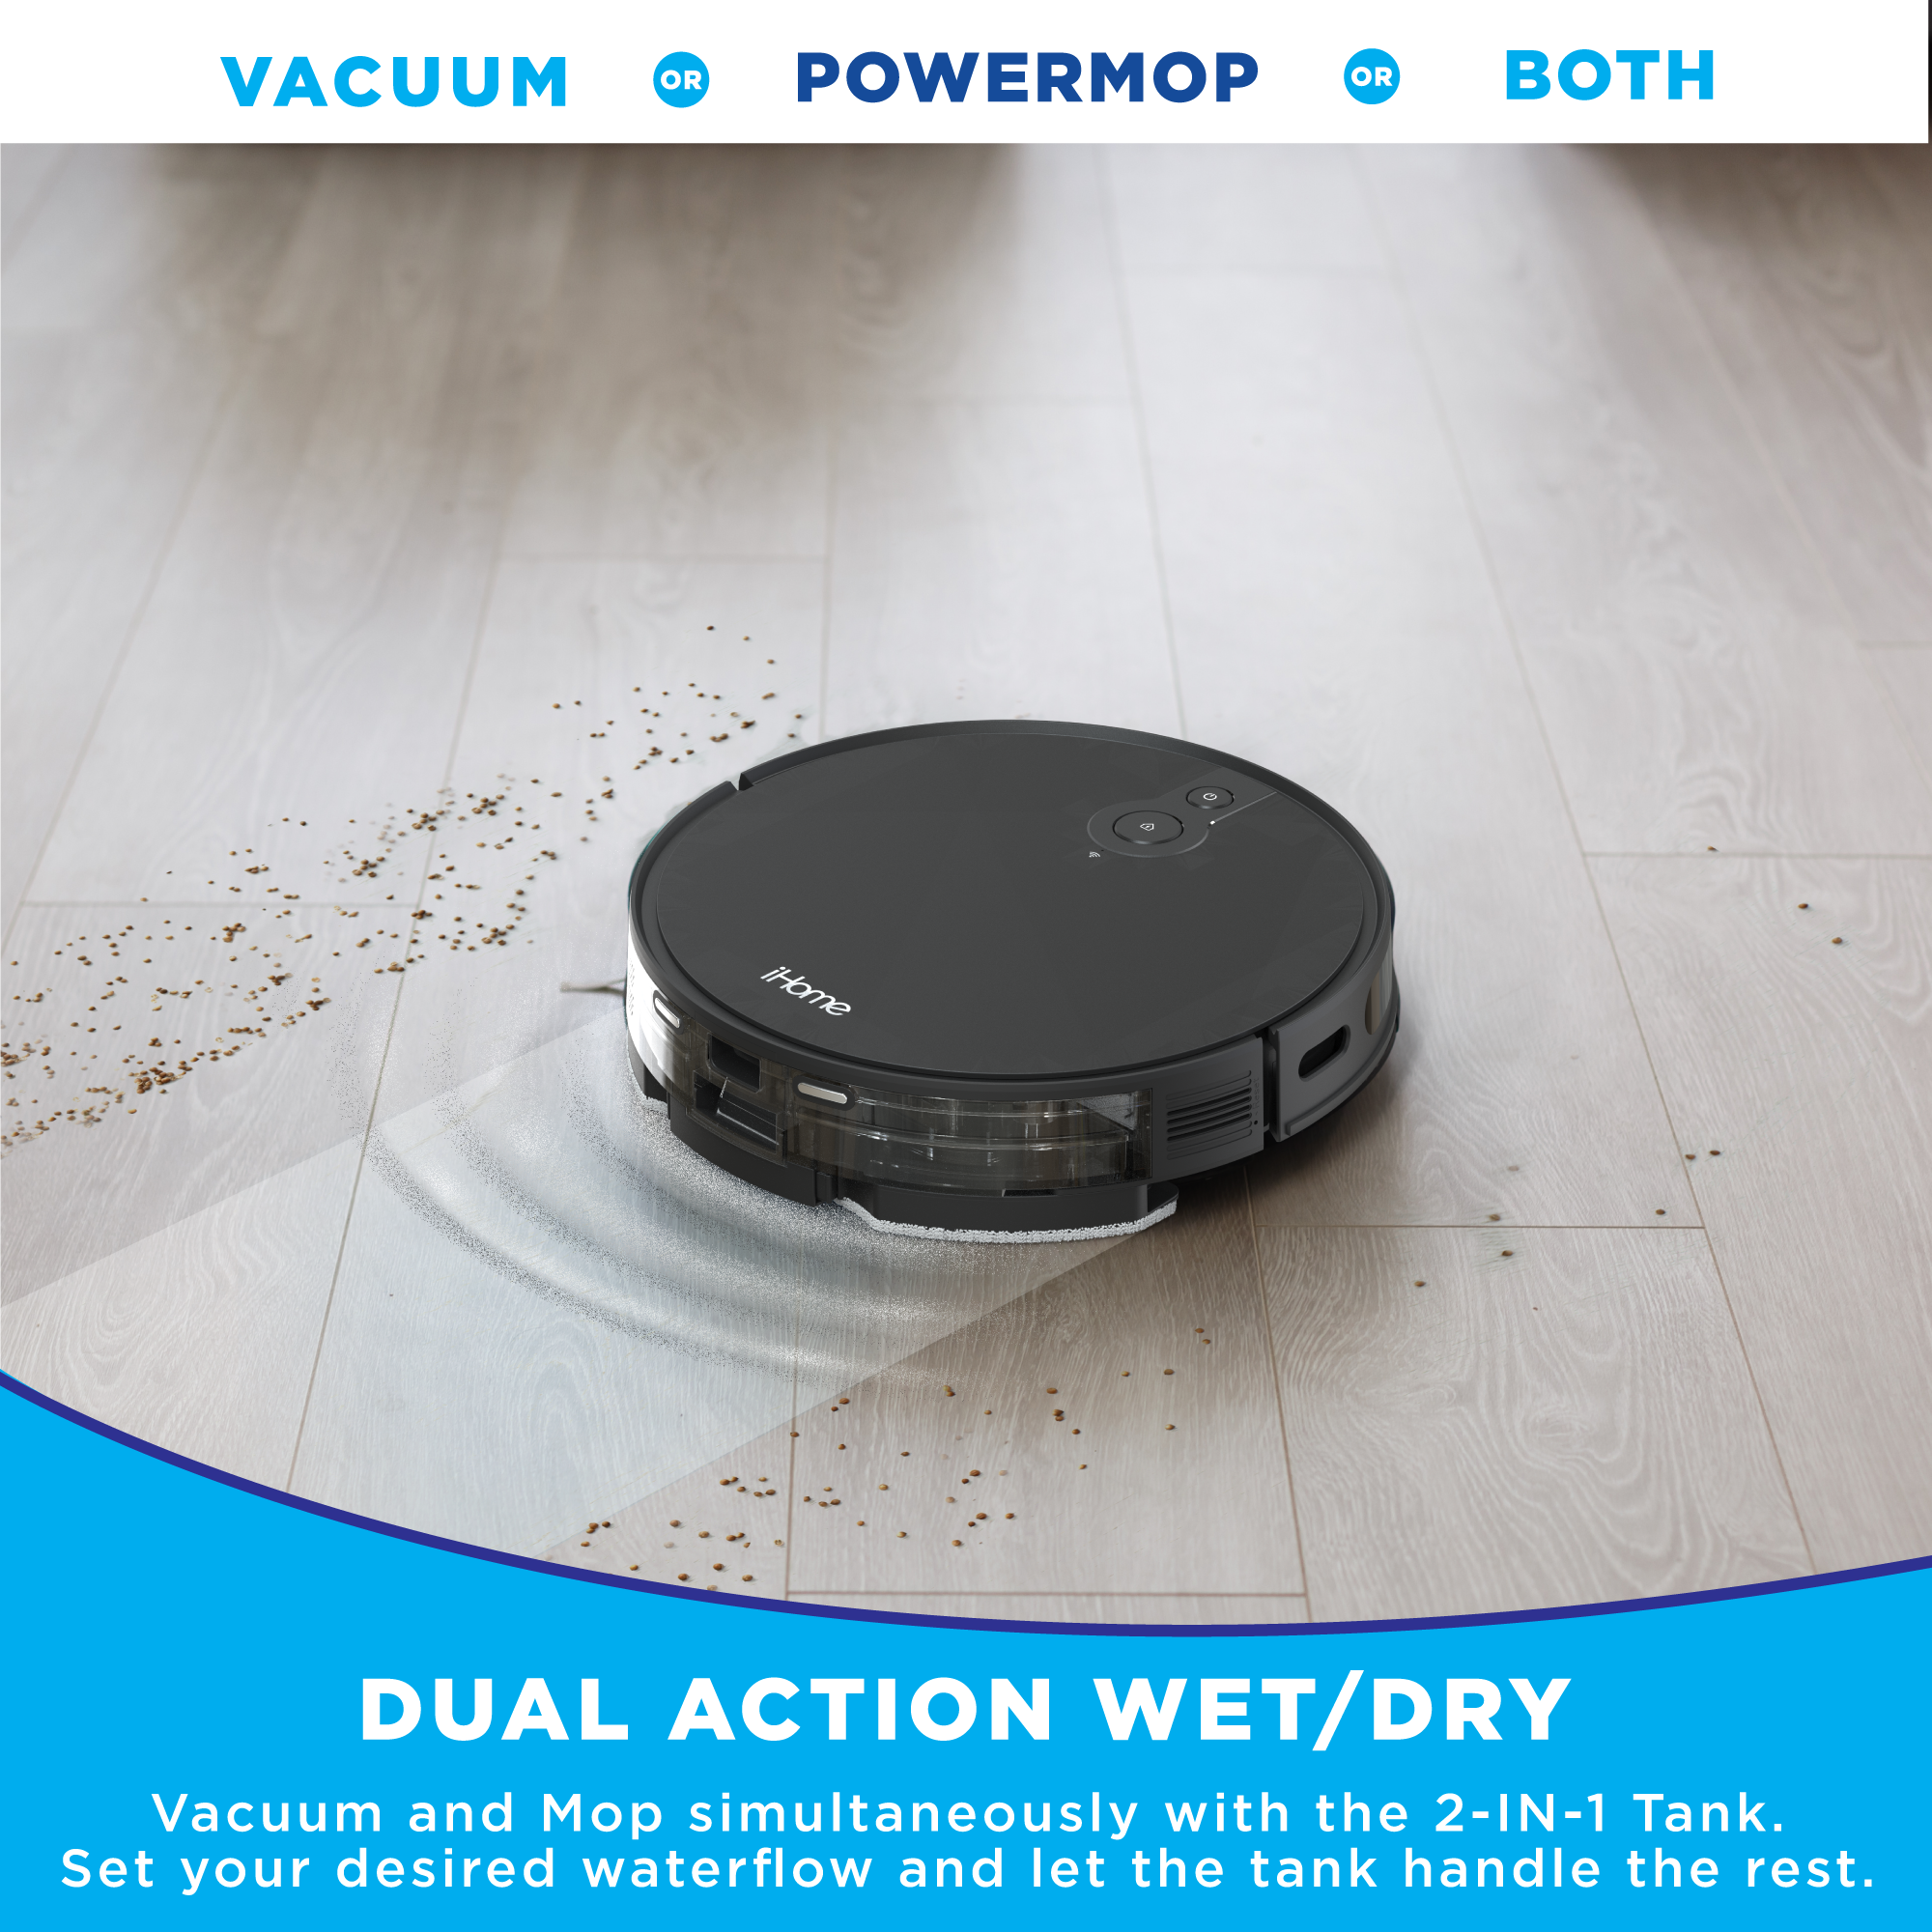 iHome AutoVac Eclipse Pro 3-in-1 Robot Vacuum and Vibrating Mop, Homemap Navigation - image 5 of 10